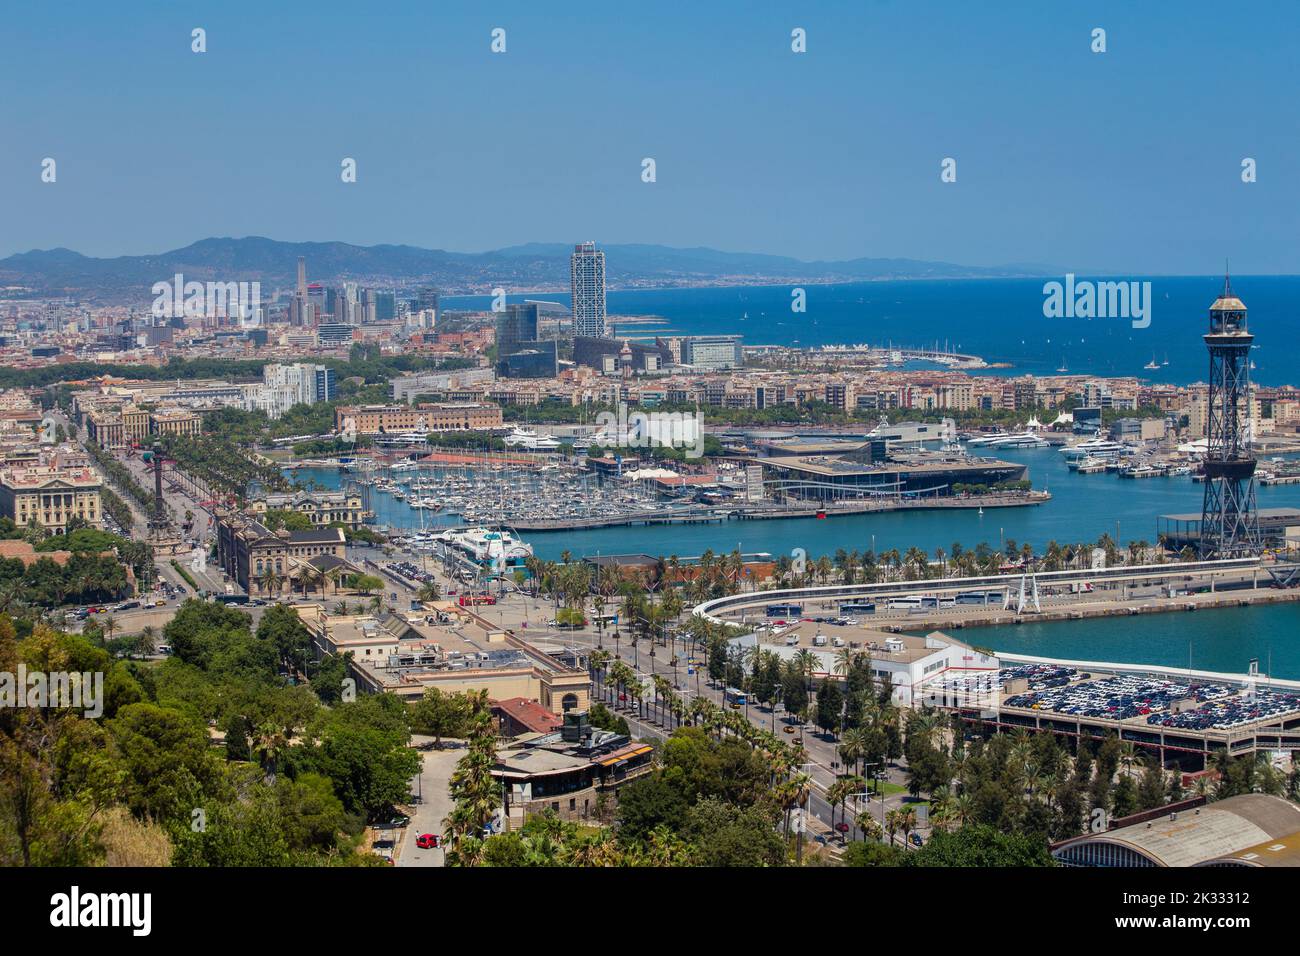 Barcelona Port Vell harbour and marina area, Spain Stock Photo